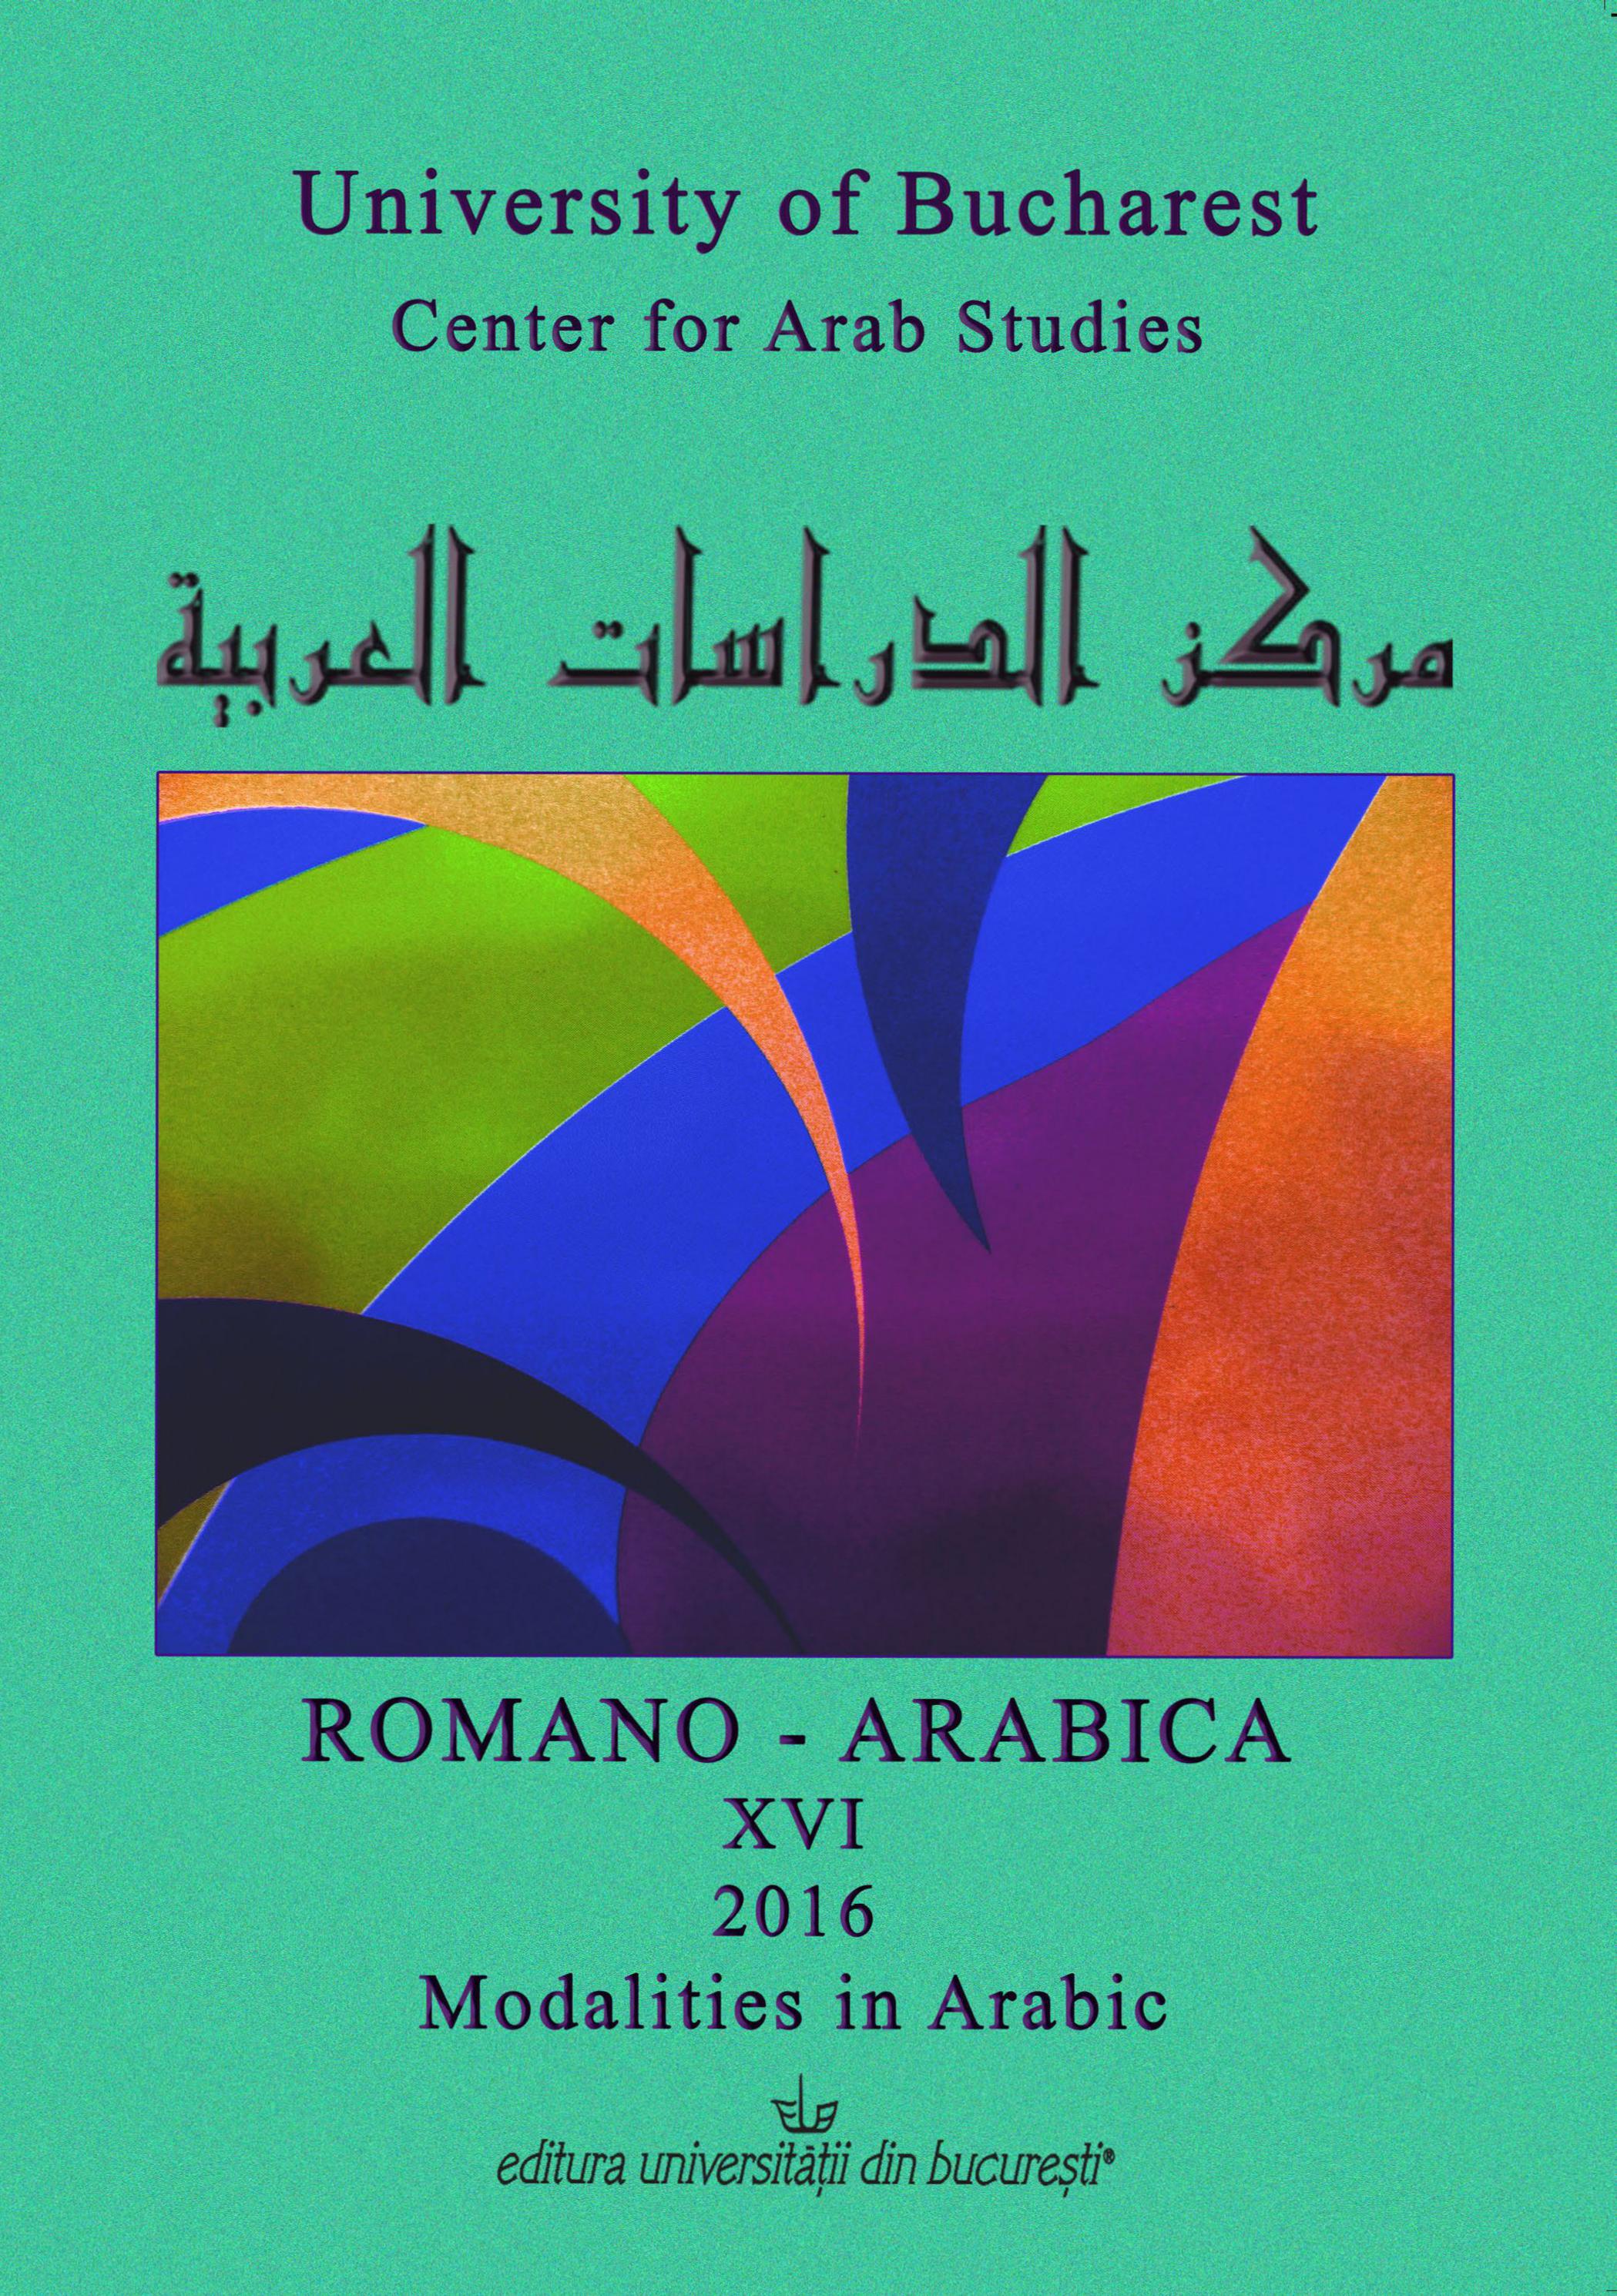 RENDITIONS OF THE ARABIC MODALITY KĀDA IN MORISCO TRANSLATIONS OF THE QUR’AN